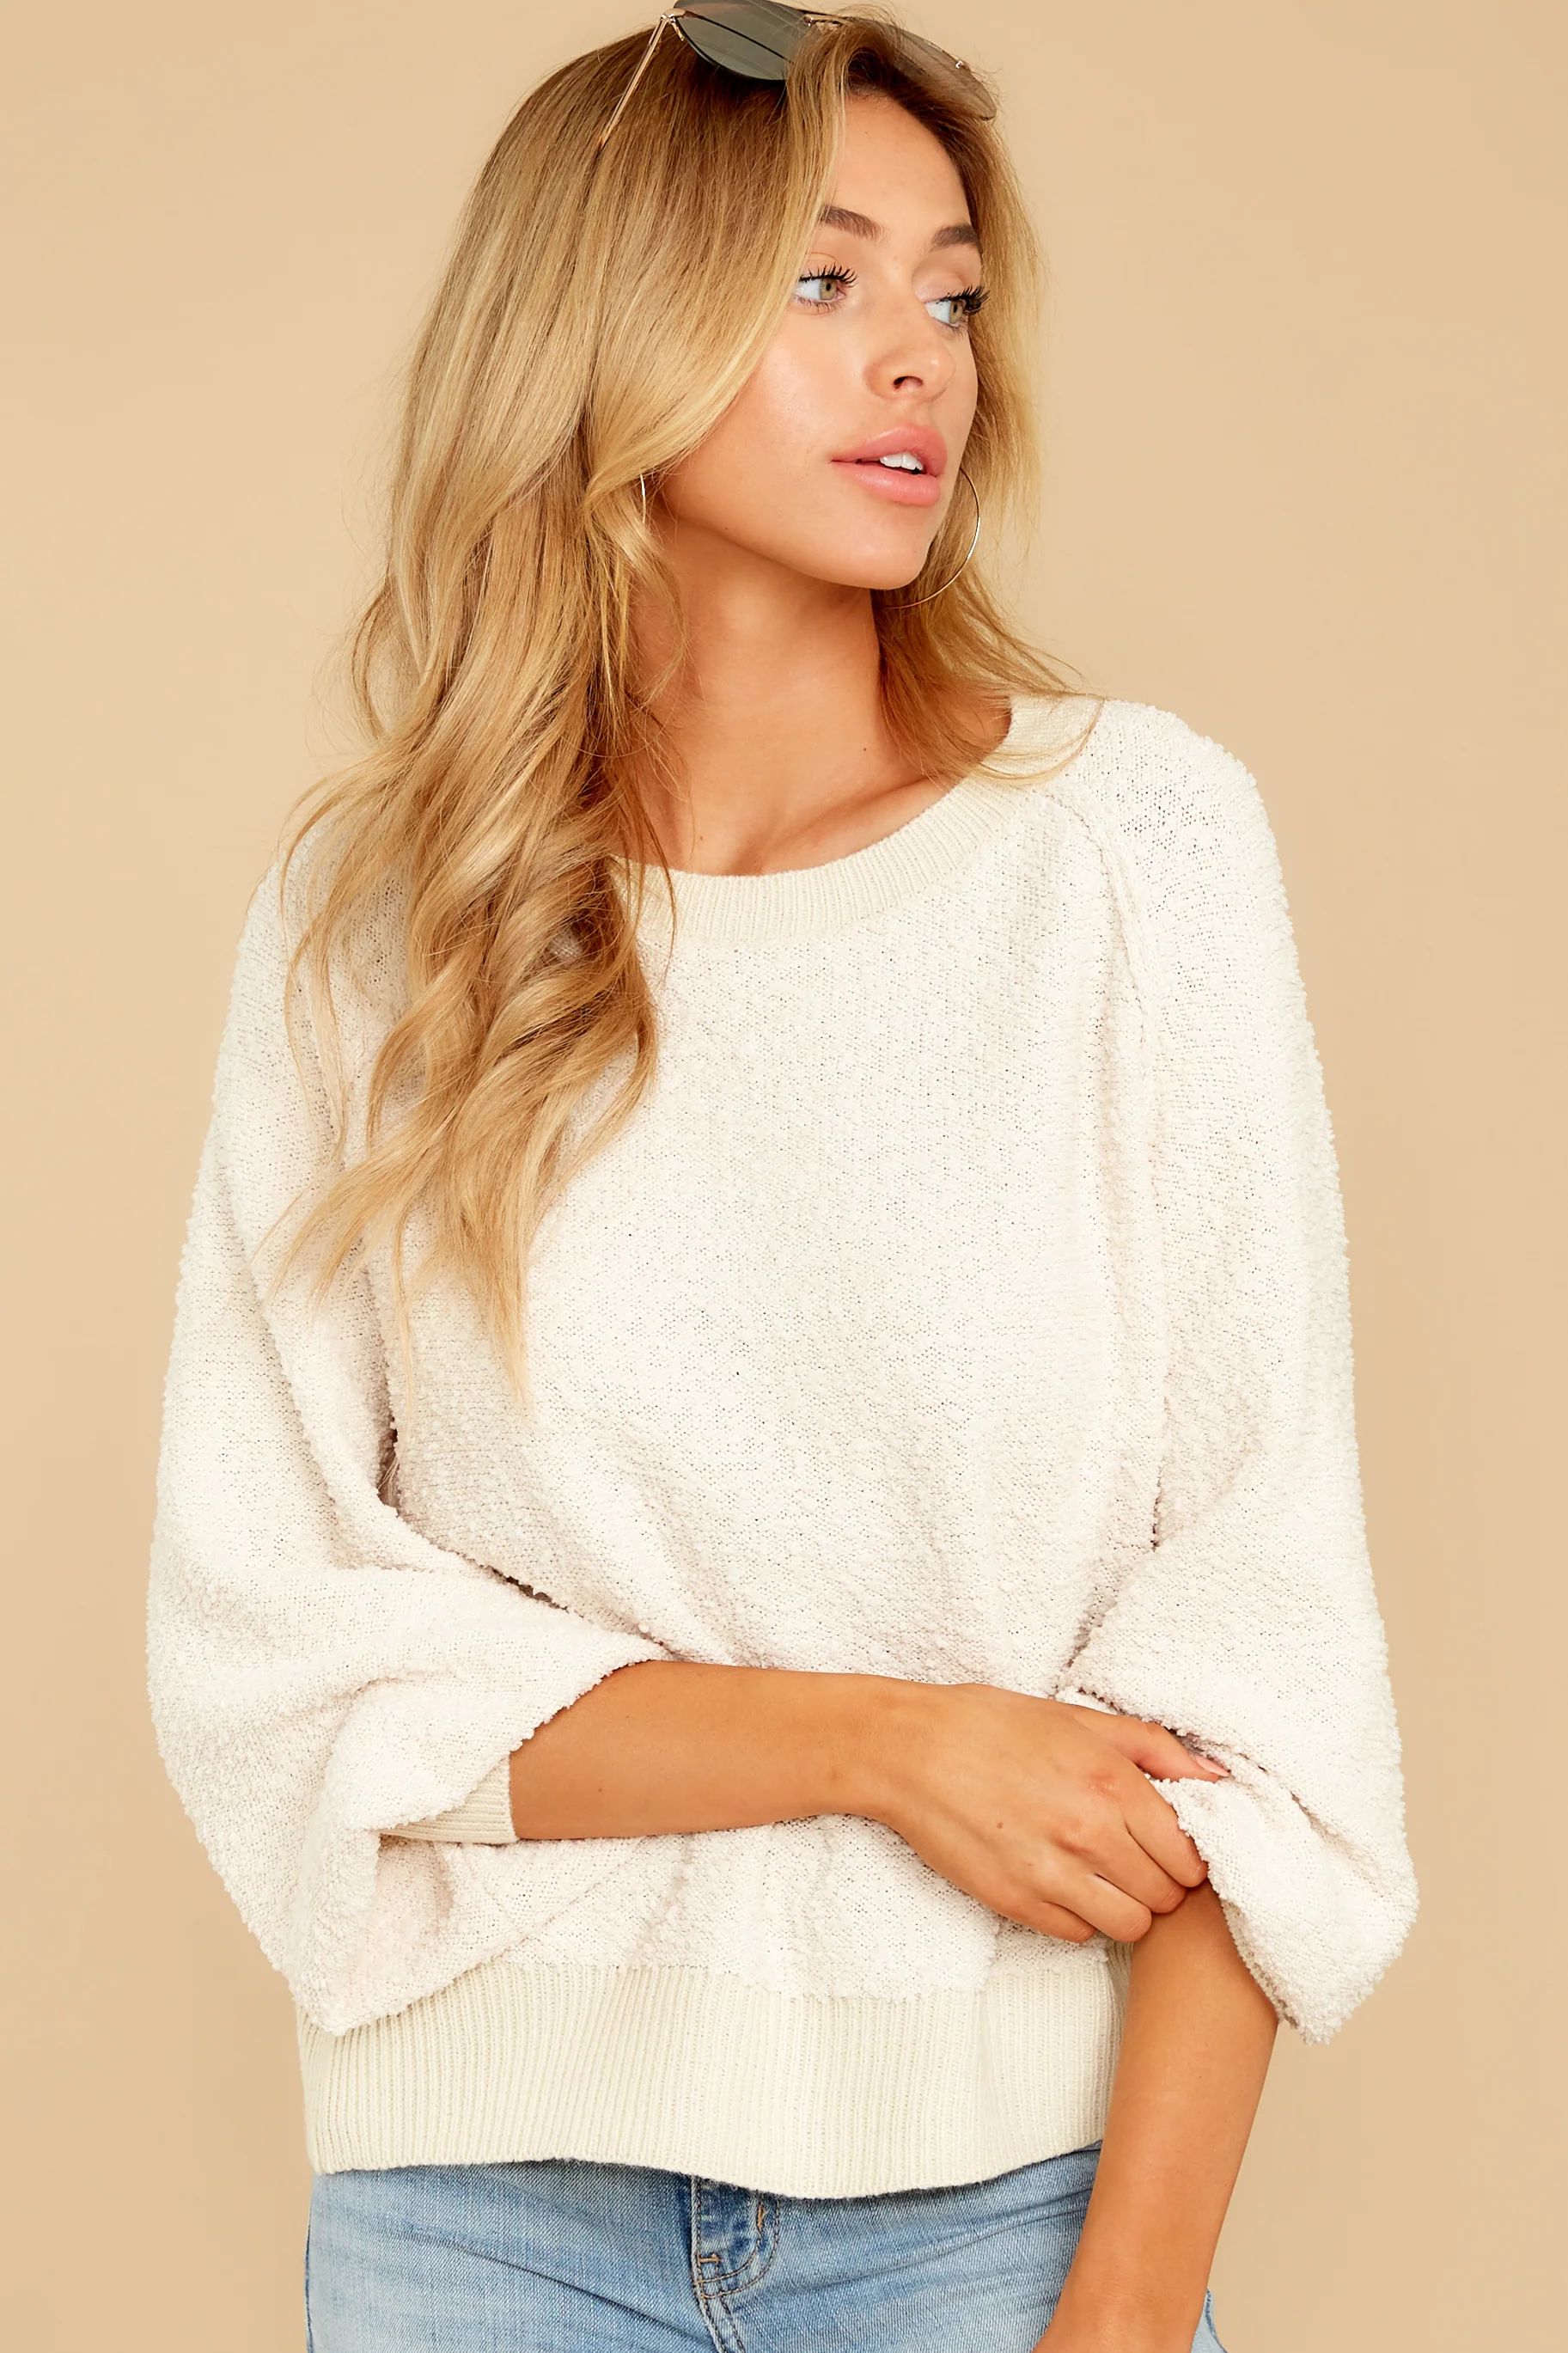 Feeling Carefree Ivory Sweater | Red Dress 